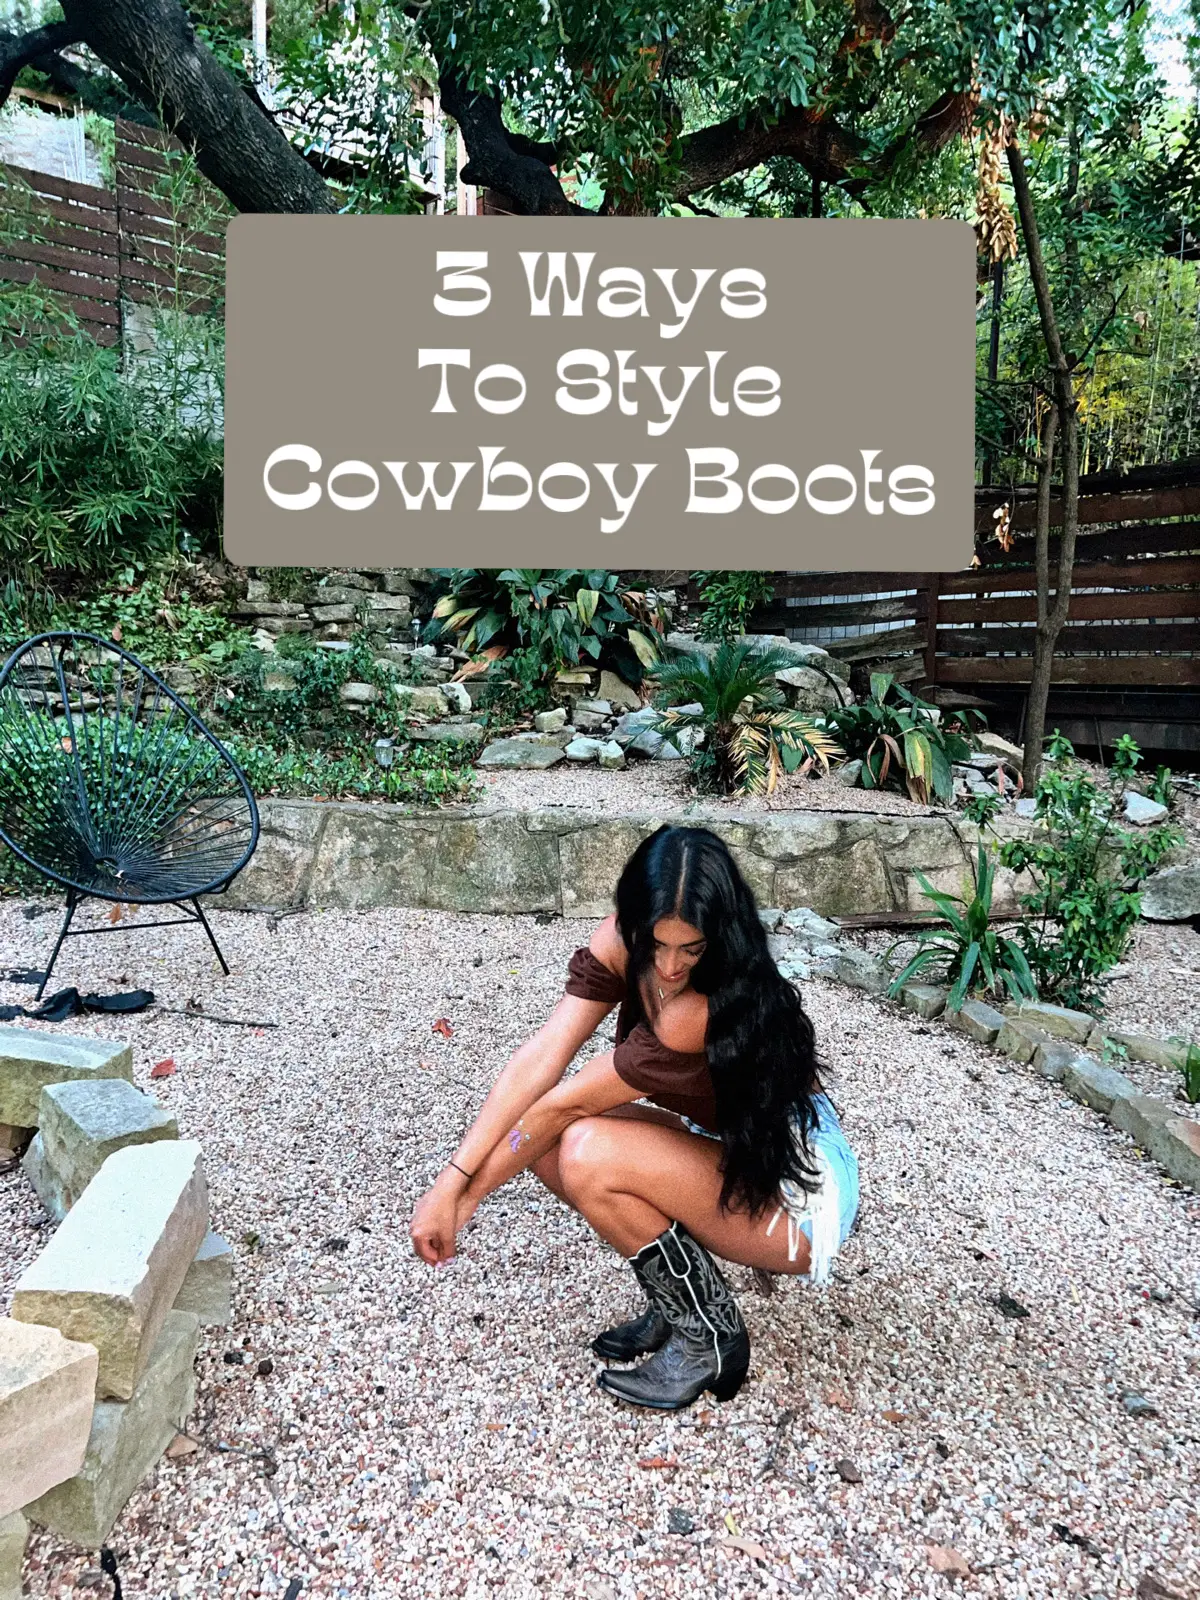 3 ways I like to wear my cowboy boots, Gallery posted by Nancy Navarro